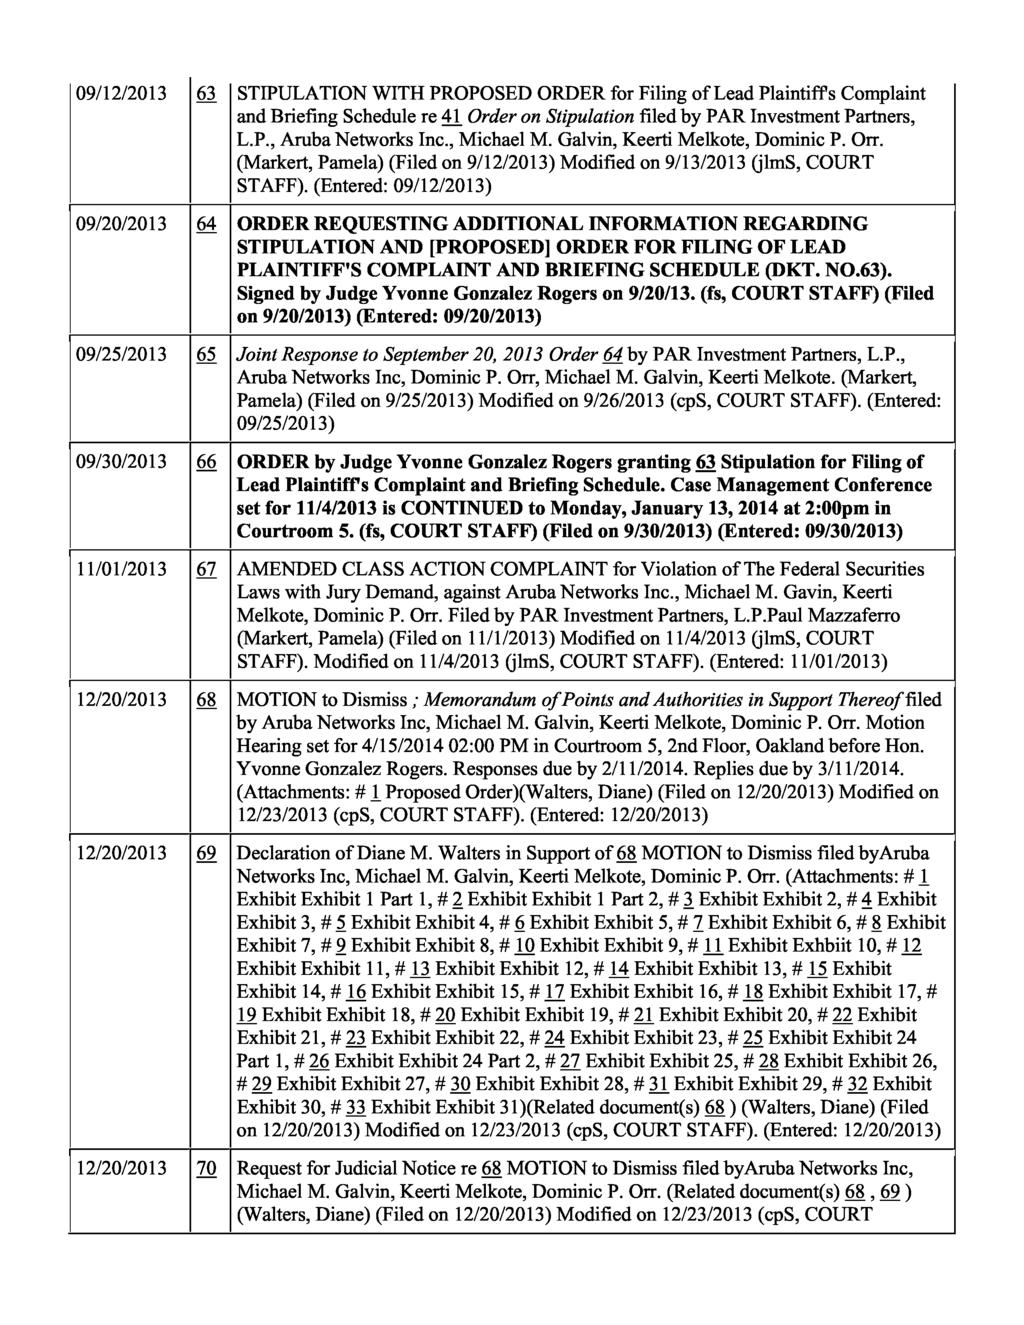 09/12/2013 63 STIPULATION WITH PROPOSED ORDER for Filing of Lead Plaintiff's Complaint and Briefing Schedule re 41 Order on Stipulation filed by PAR Investment Partners, L.P., Aruba Networks Inc.